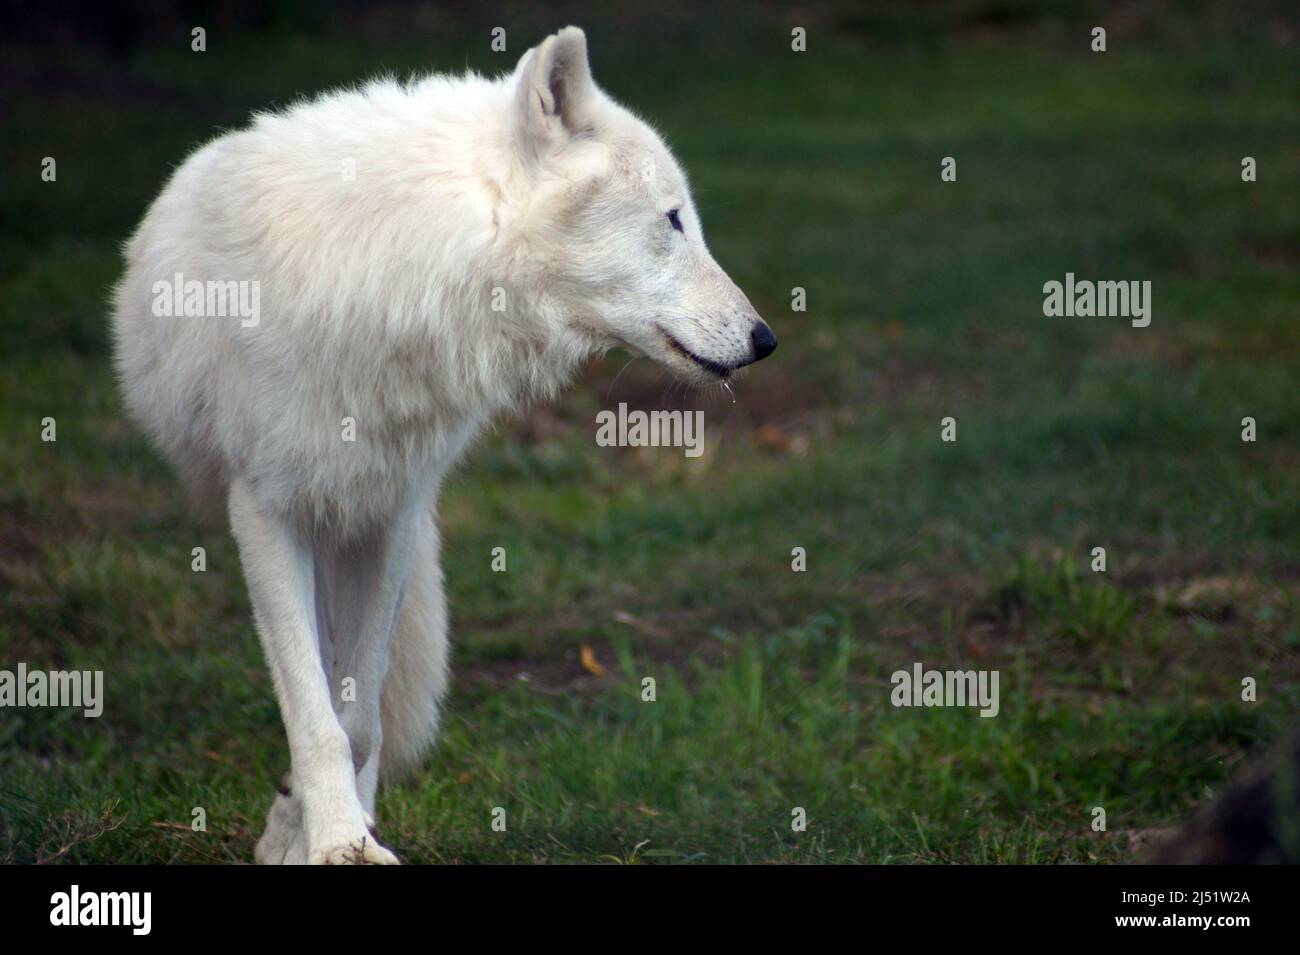 Dances arctic wolf- the wolves have an unusual lateral ambling gait, which makes them seem to be dancing. Stock Photo